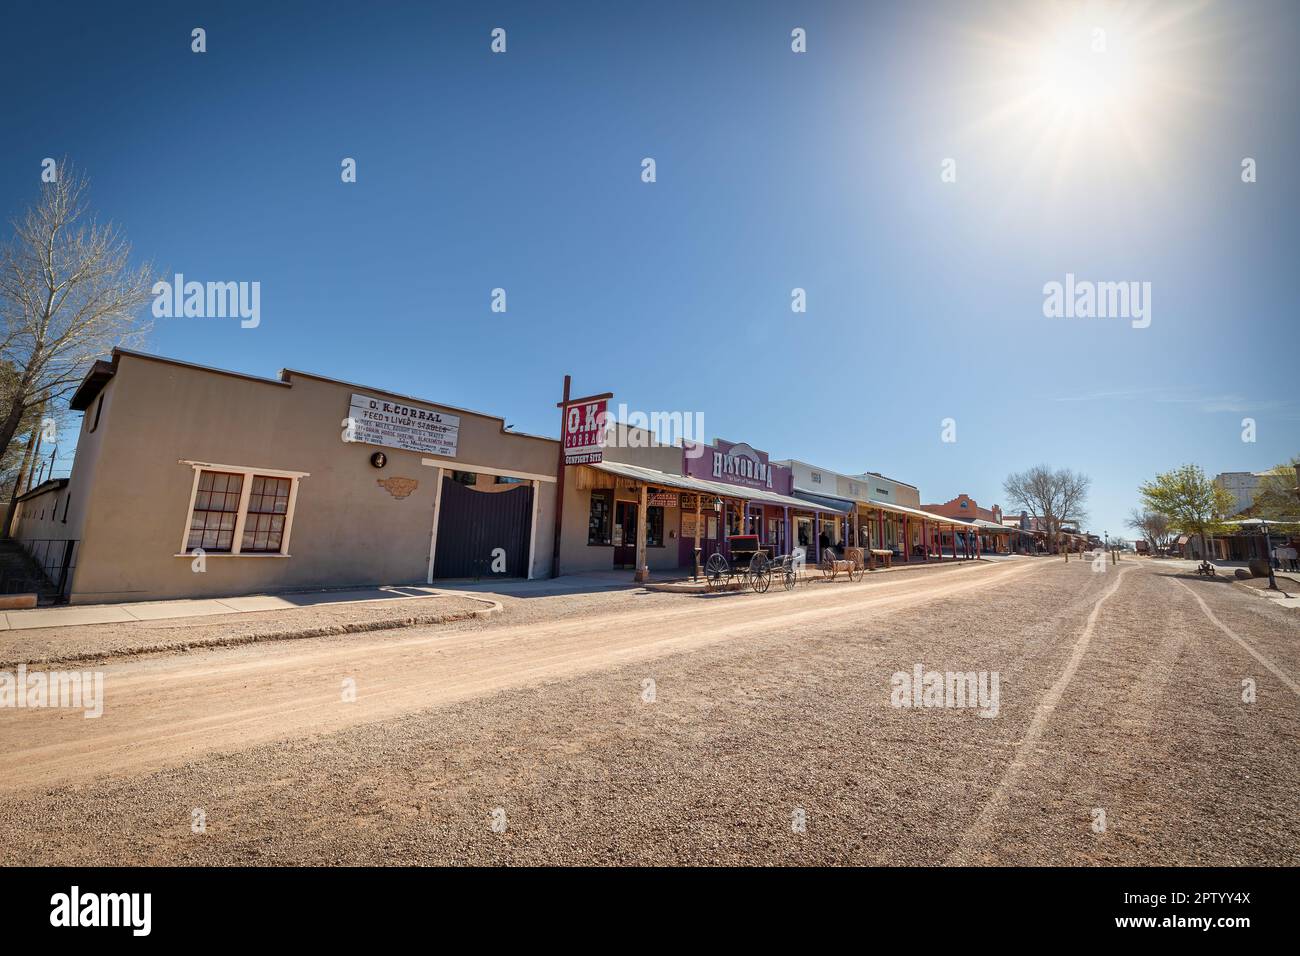 The O.K. Corral on Allen Street, site of the famous Gunfight at the O.K. Corral, in the old west town of Tombstone, Arizona. Stock Photo